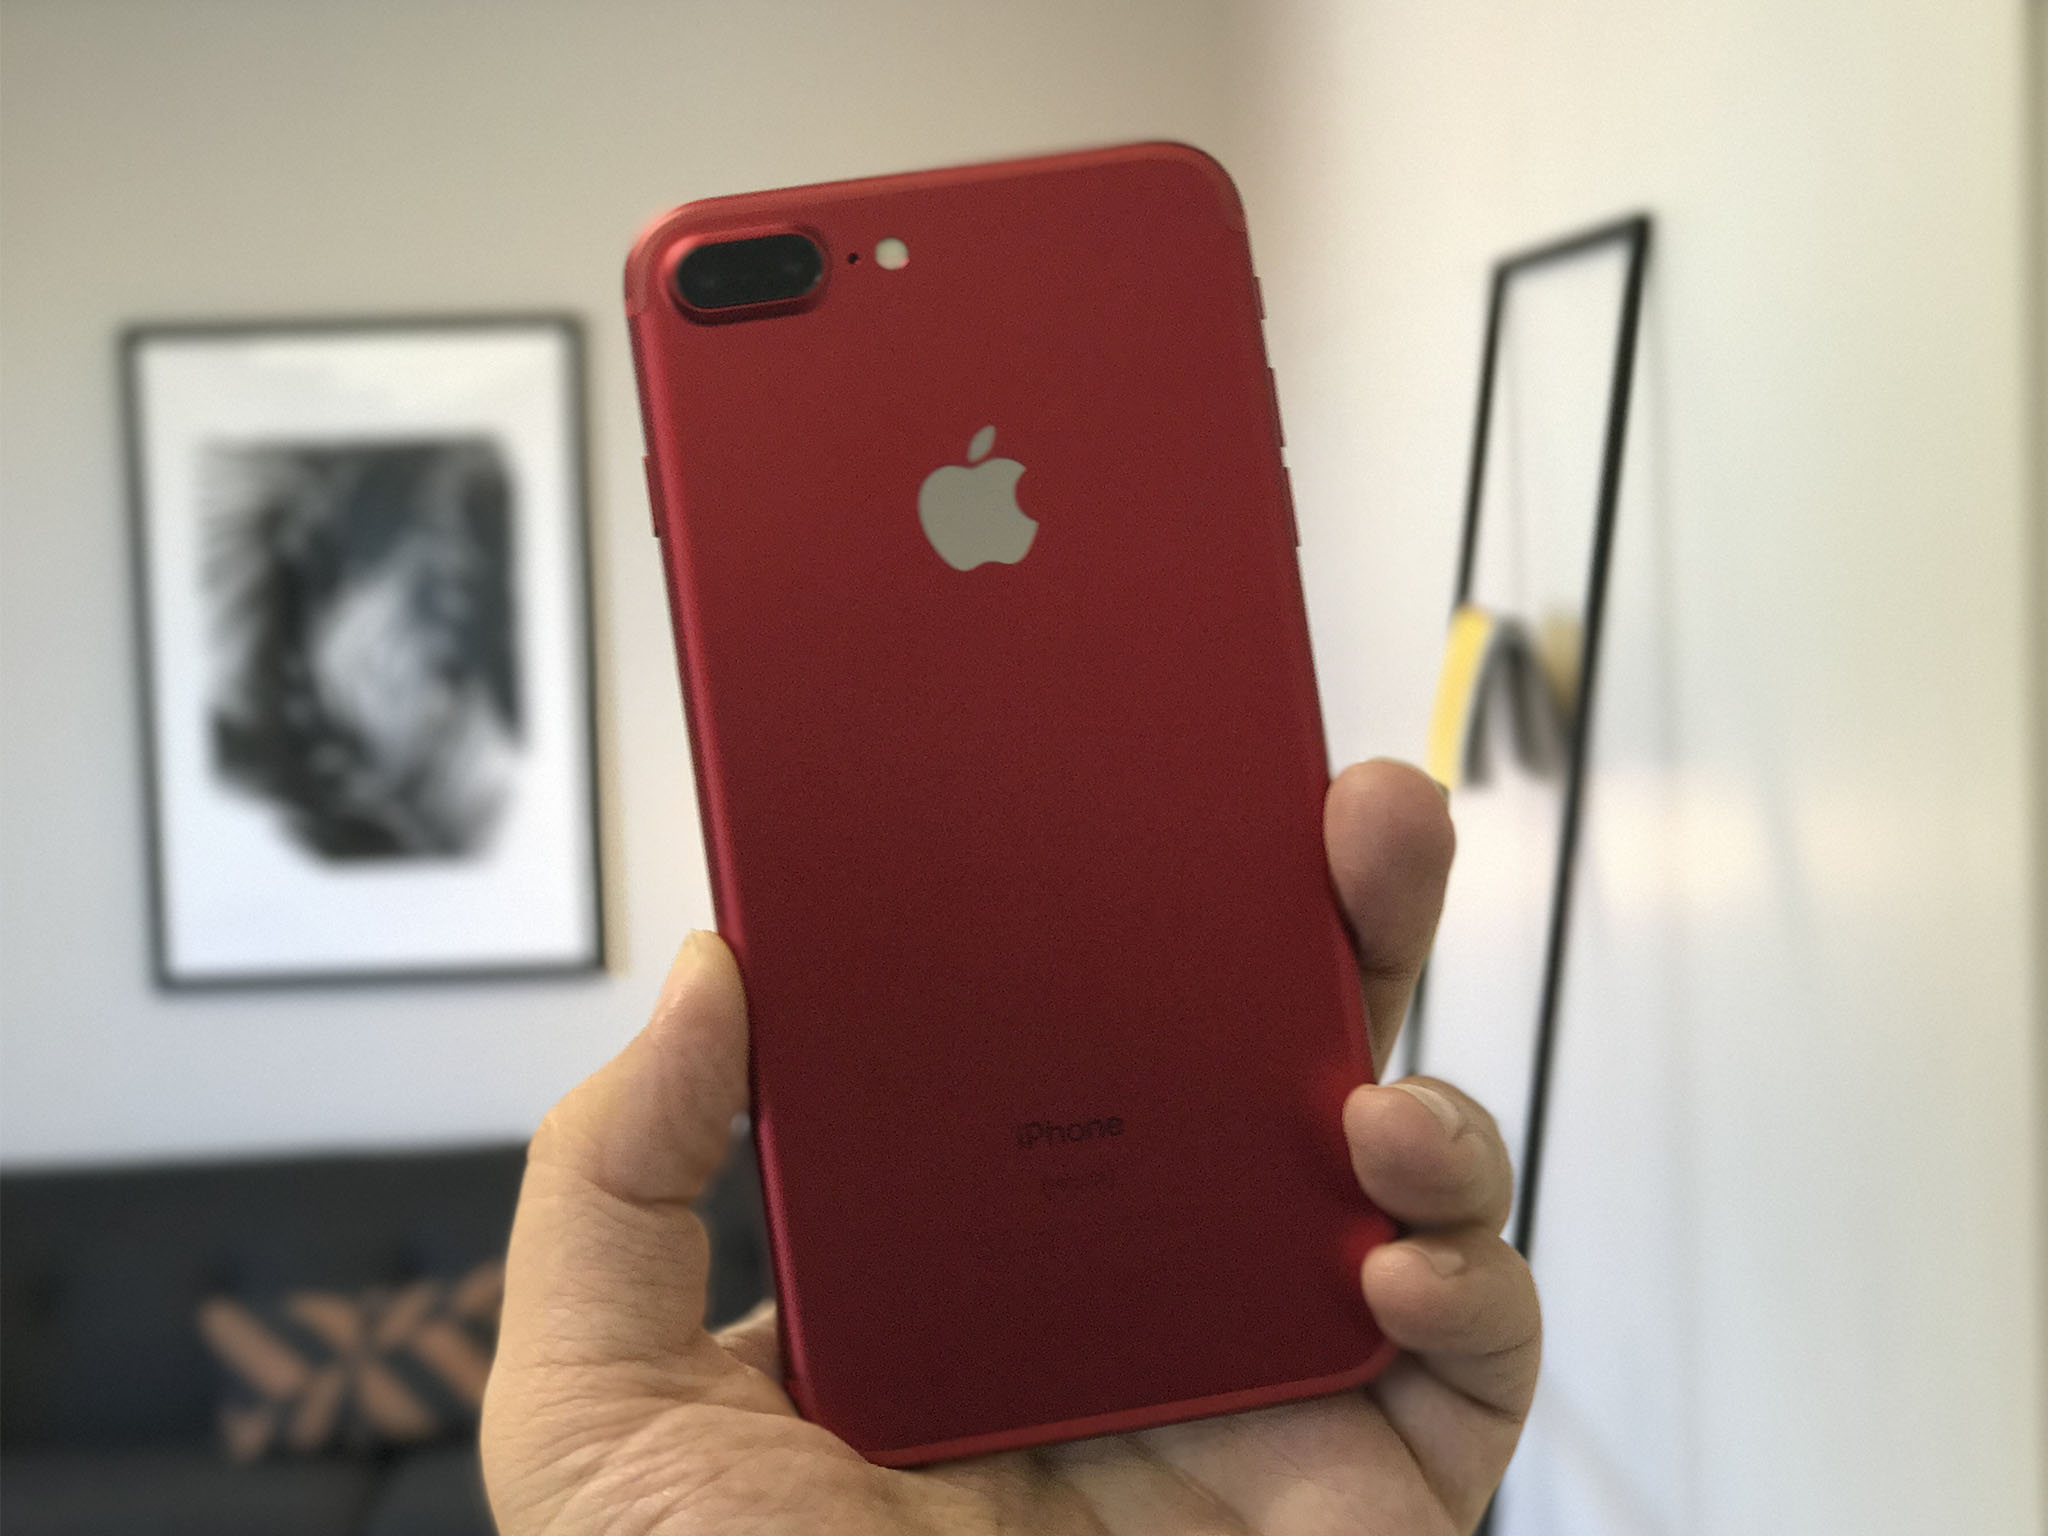 iPhone 7 Review: Now in (Product) RED